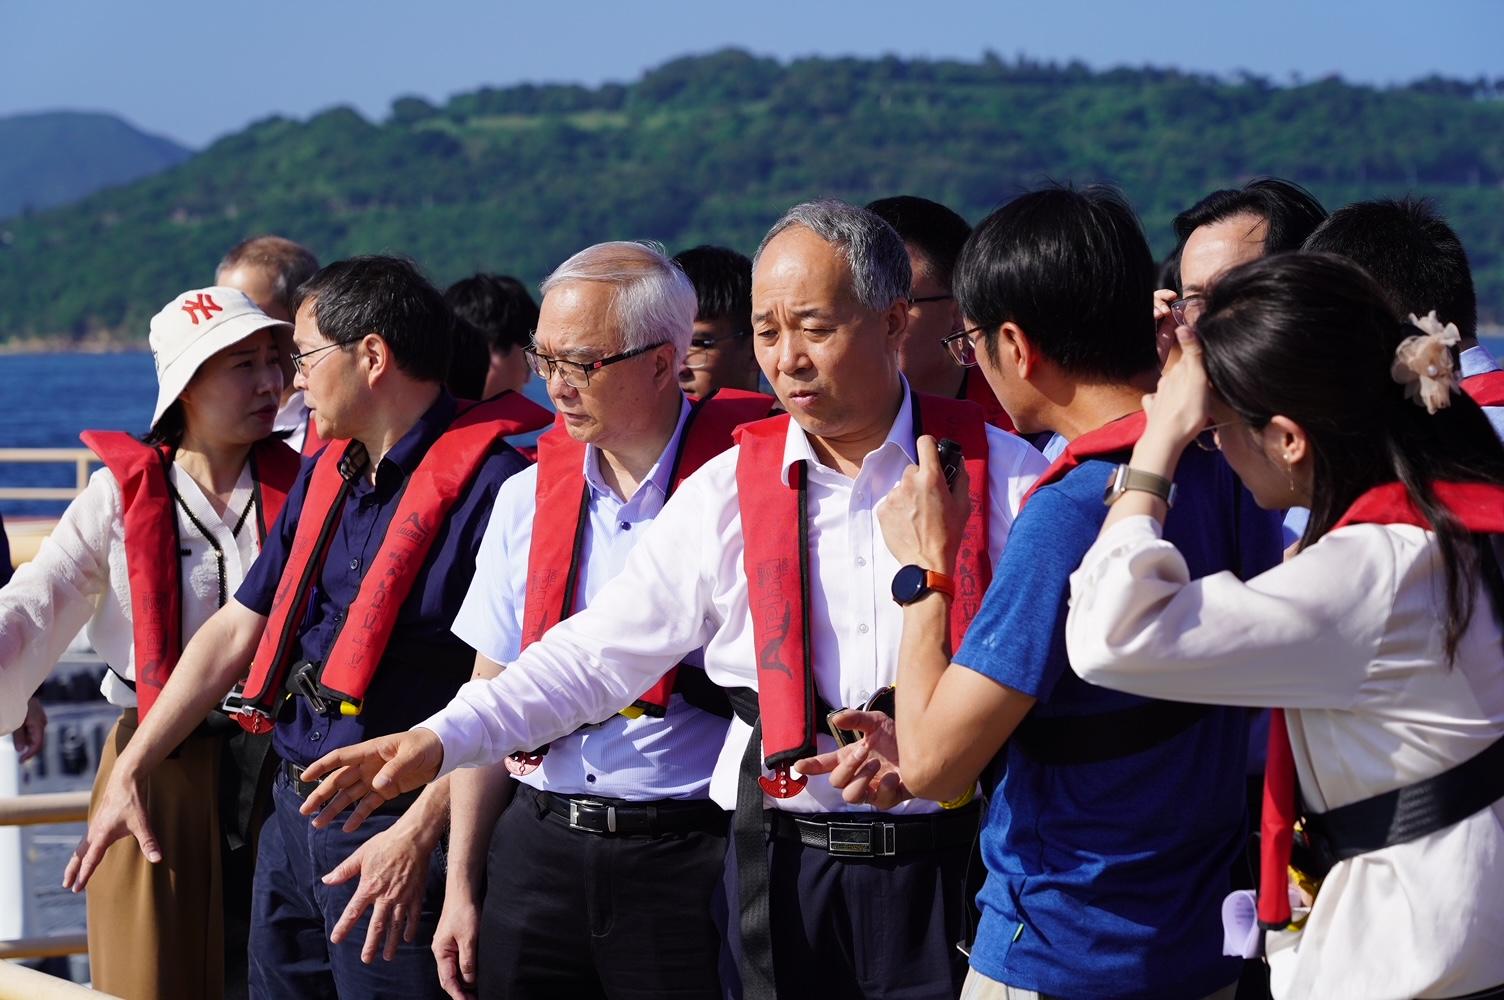 The Secretary for Environment and Ecology, Mr Tse Chin-wan, today (May 28) accompanied a research team led by the Vice Minister of Agriculture and Rural Affairs, Mr Ma Youxiang, and the Director-General of the Department of Agriculture and Rural Affairs of Guangdong Province, Mr Liu Zonghui, to visit the modern mariculture demonstration farm at Tung Lung Chau set up by the Agriculture, Fisheries and Conservation Department. Photo shows Mr Tse (third left) and Mr Ma (third right) being briefed by a staff member on the operation of the demonstration farm.